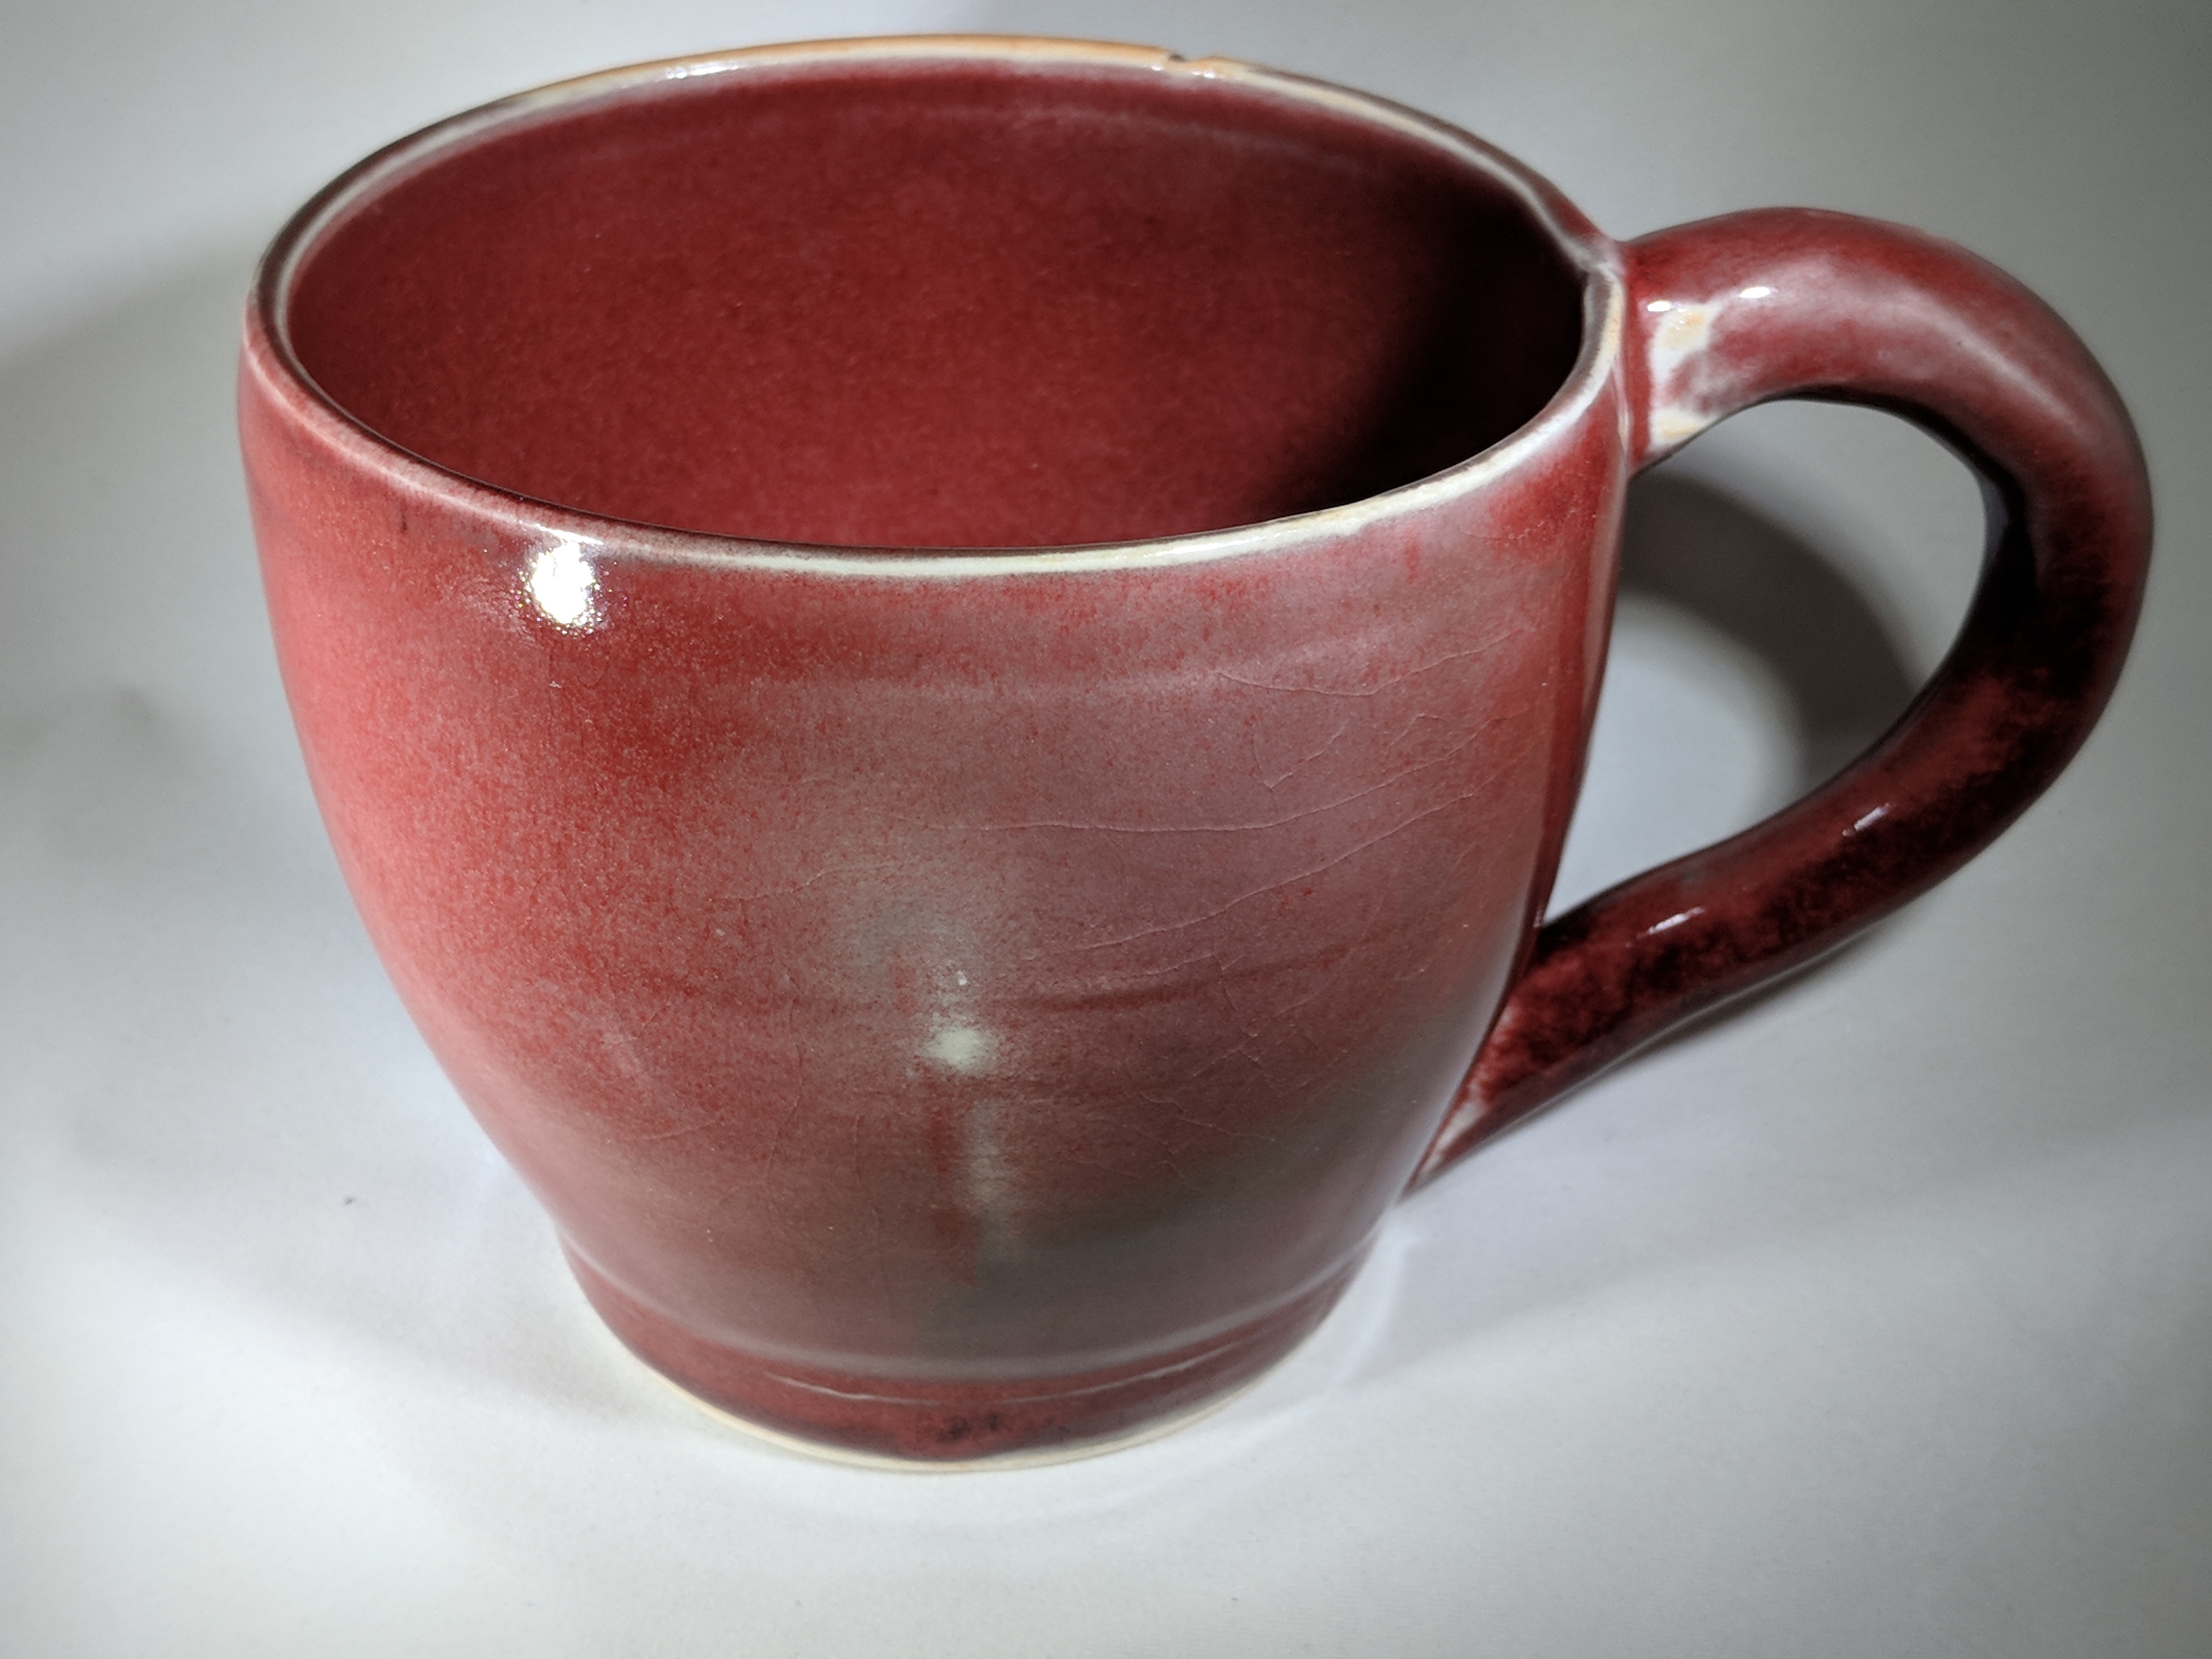 Large red cup / handled bowl